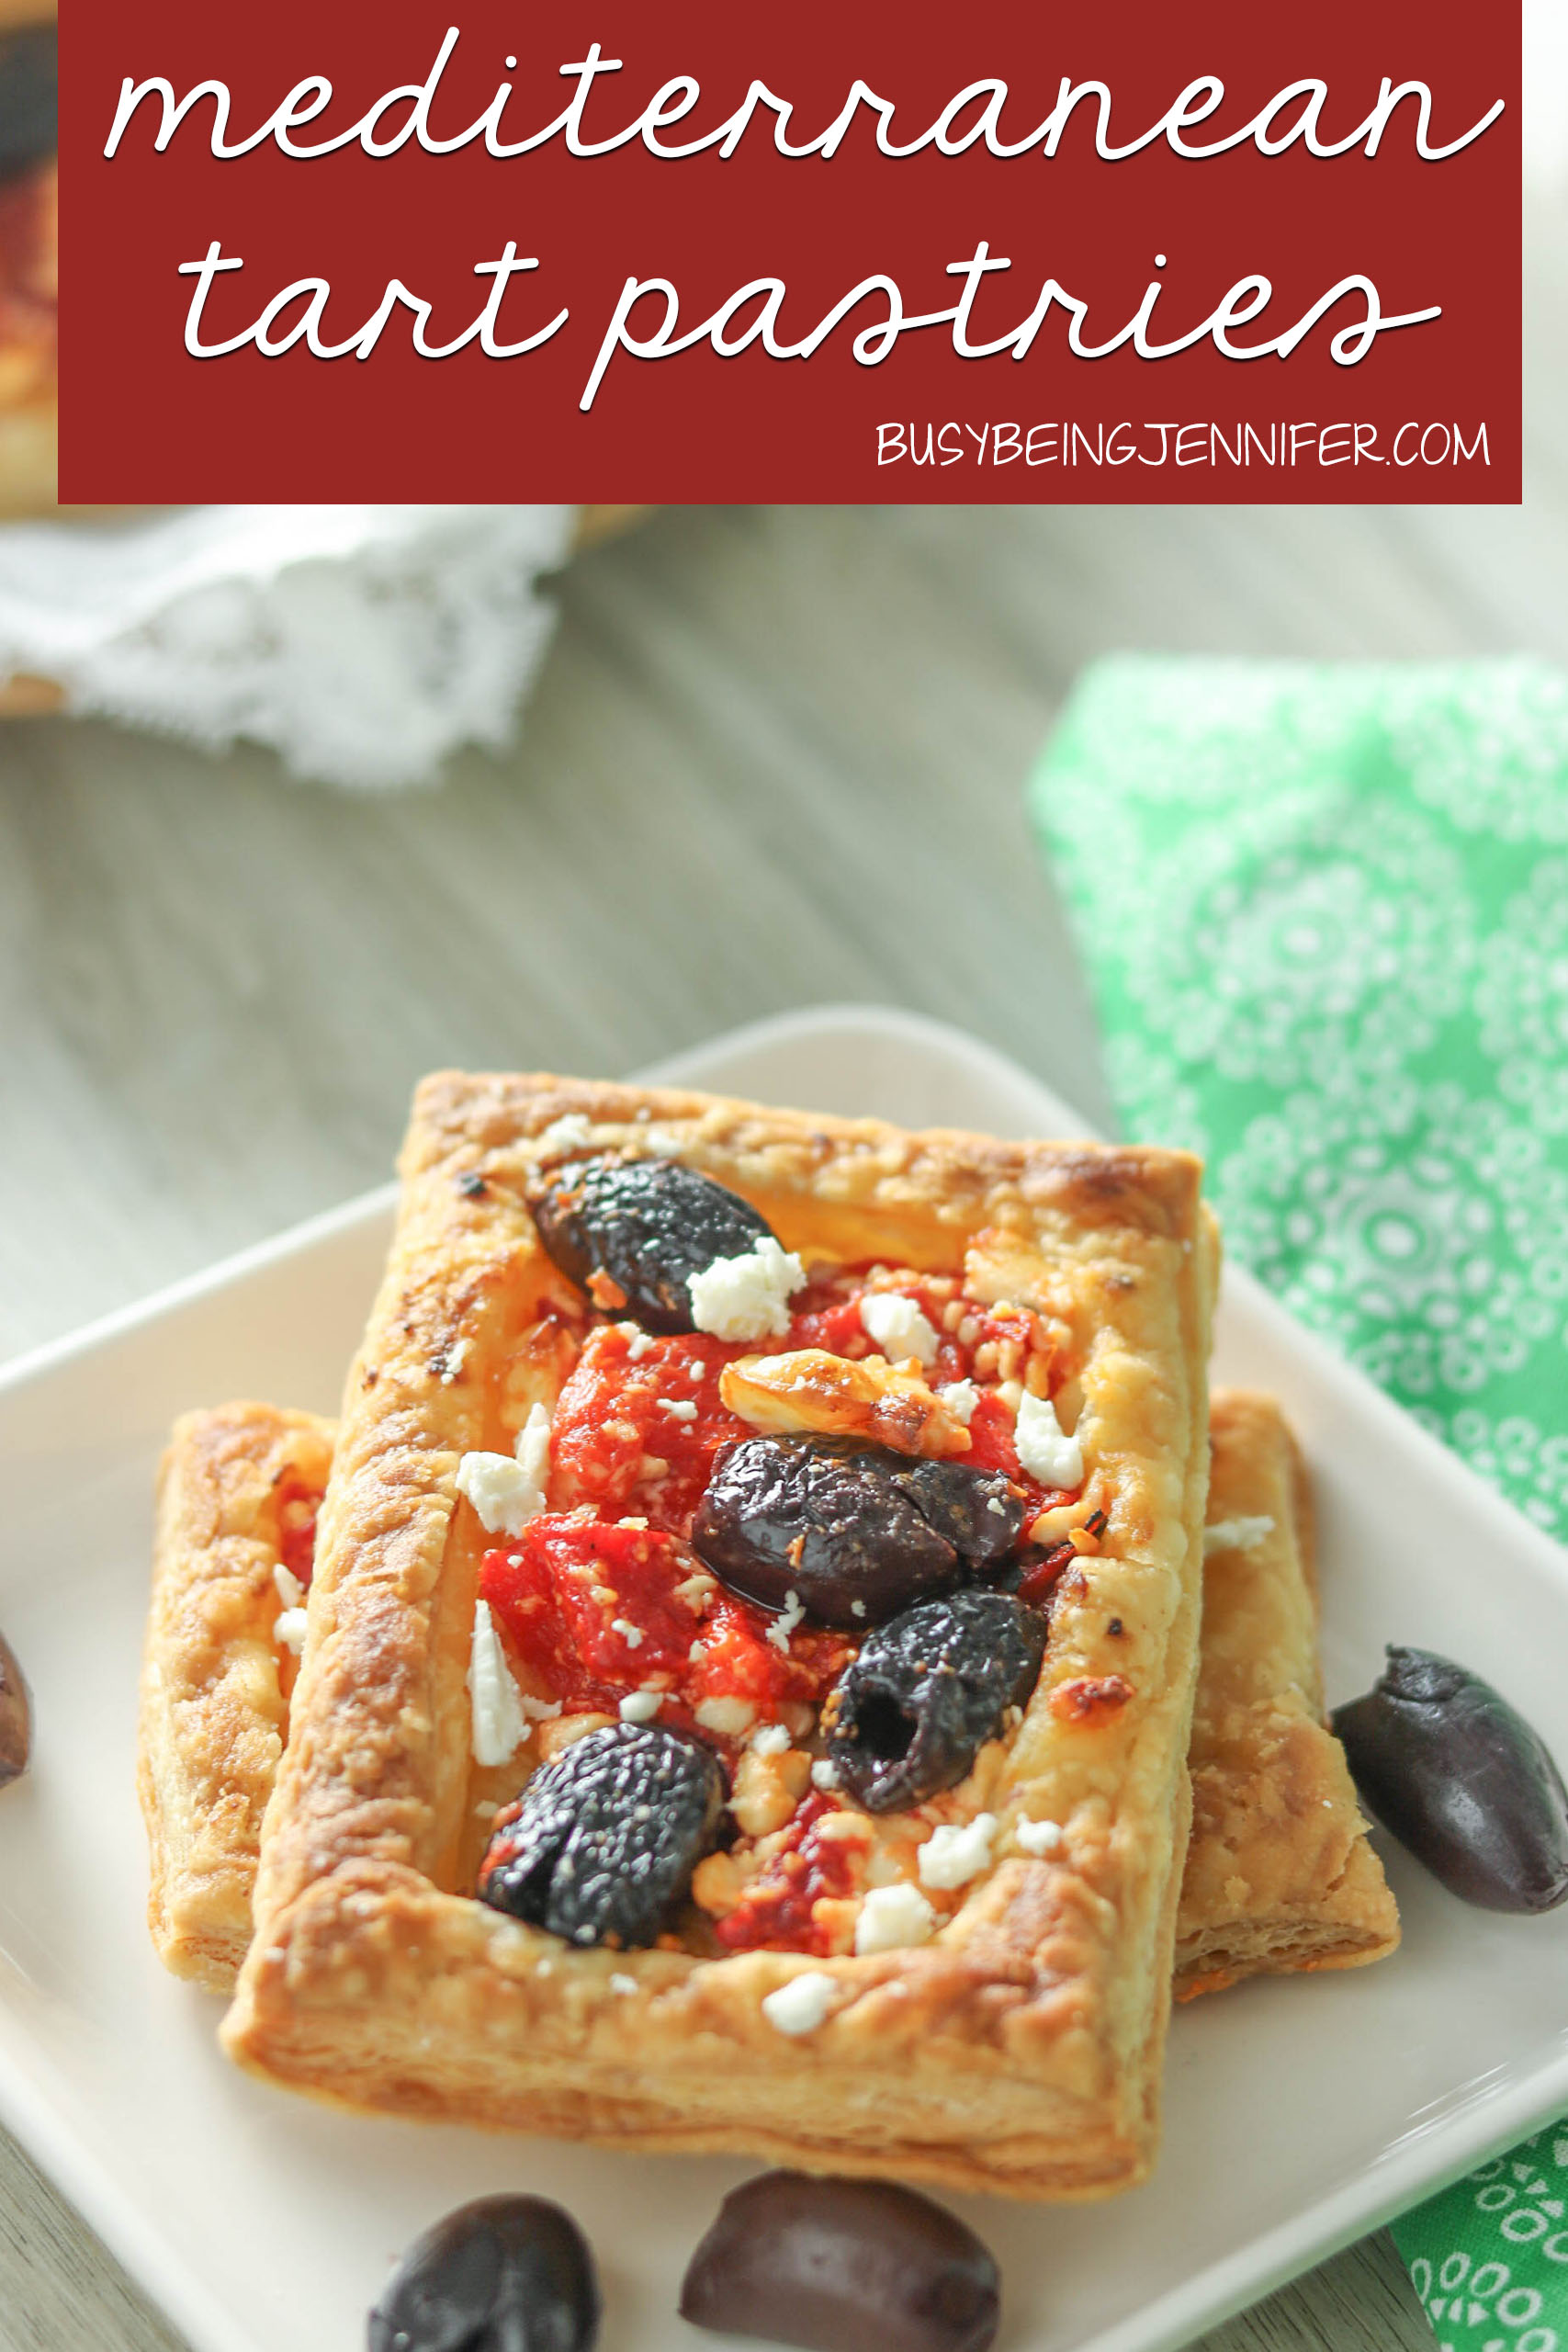 Soft, moist, spotted with familiar flavors of pizza, but in a much more lunch-sized portion for me than ordering out, these Mediterranean Red Pepper Tarts are coming up on one of my favorite lunchtime meals.